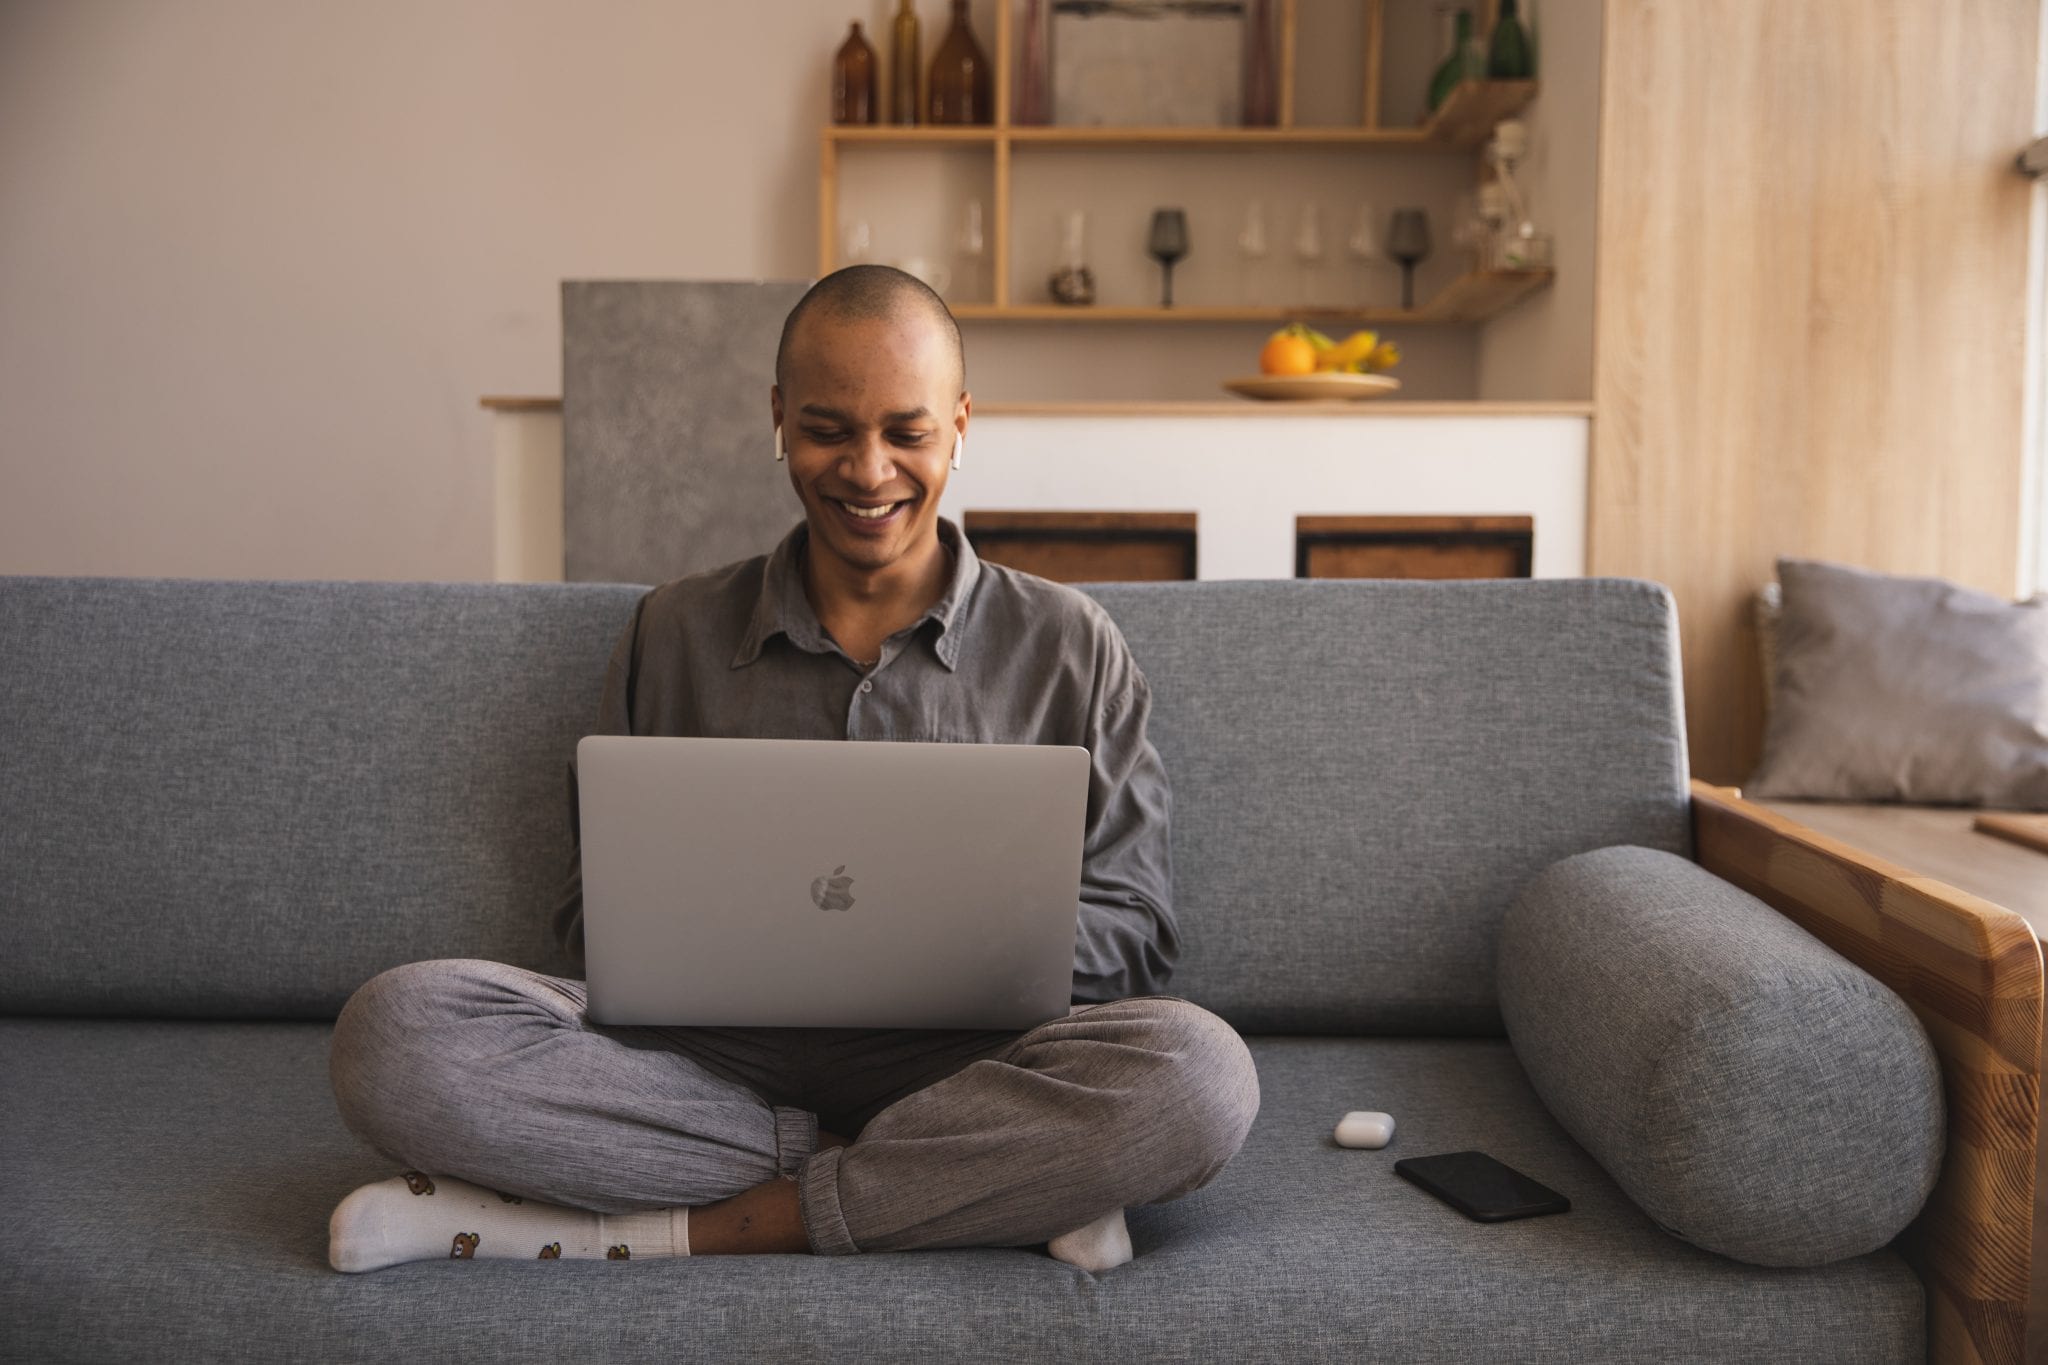 6 Work-From-Home Habits to Kick Before Heading Back to the Office